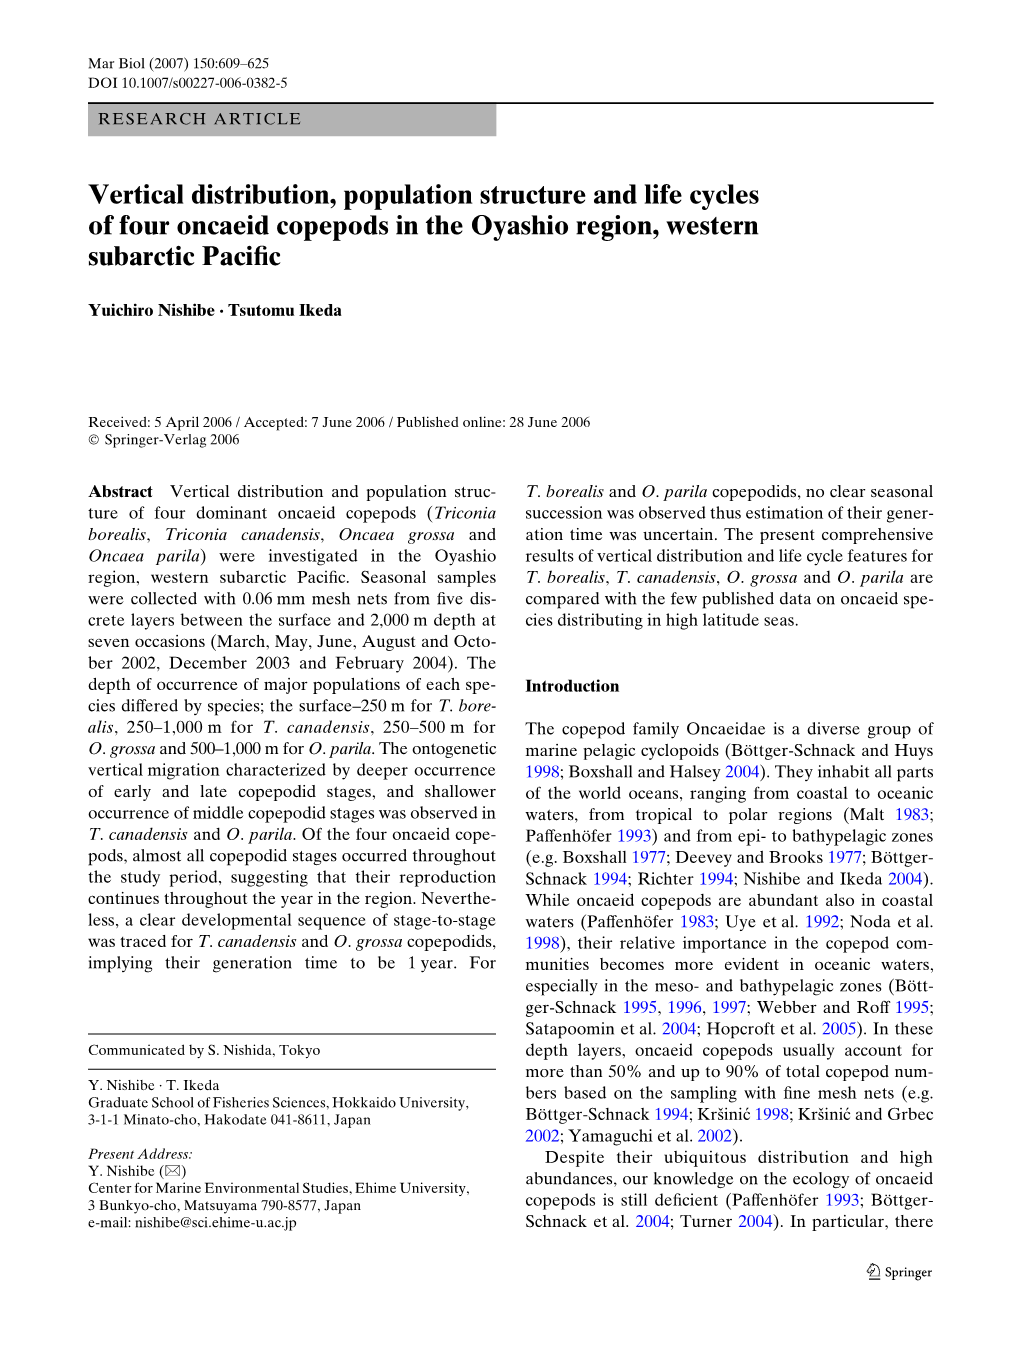 Vertical Distribution, Population Structure and Life Cycles of Four Oncaeid Copepods in the Oyashio Region, Western Subarctic Paciwc